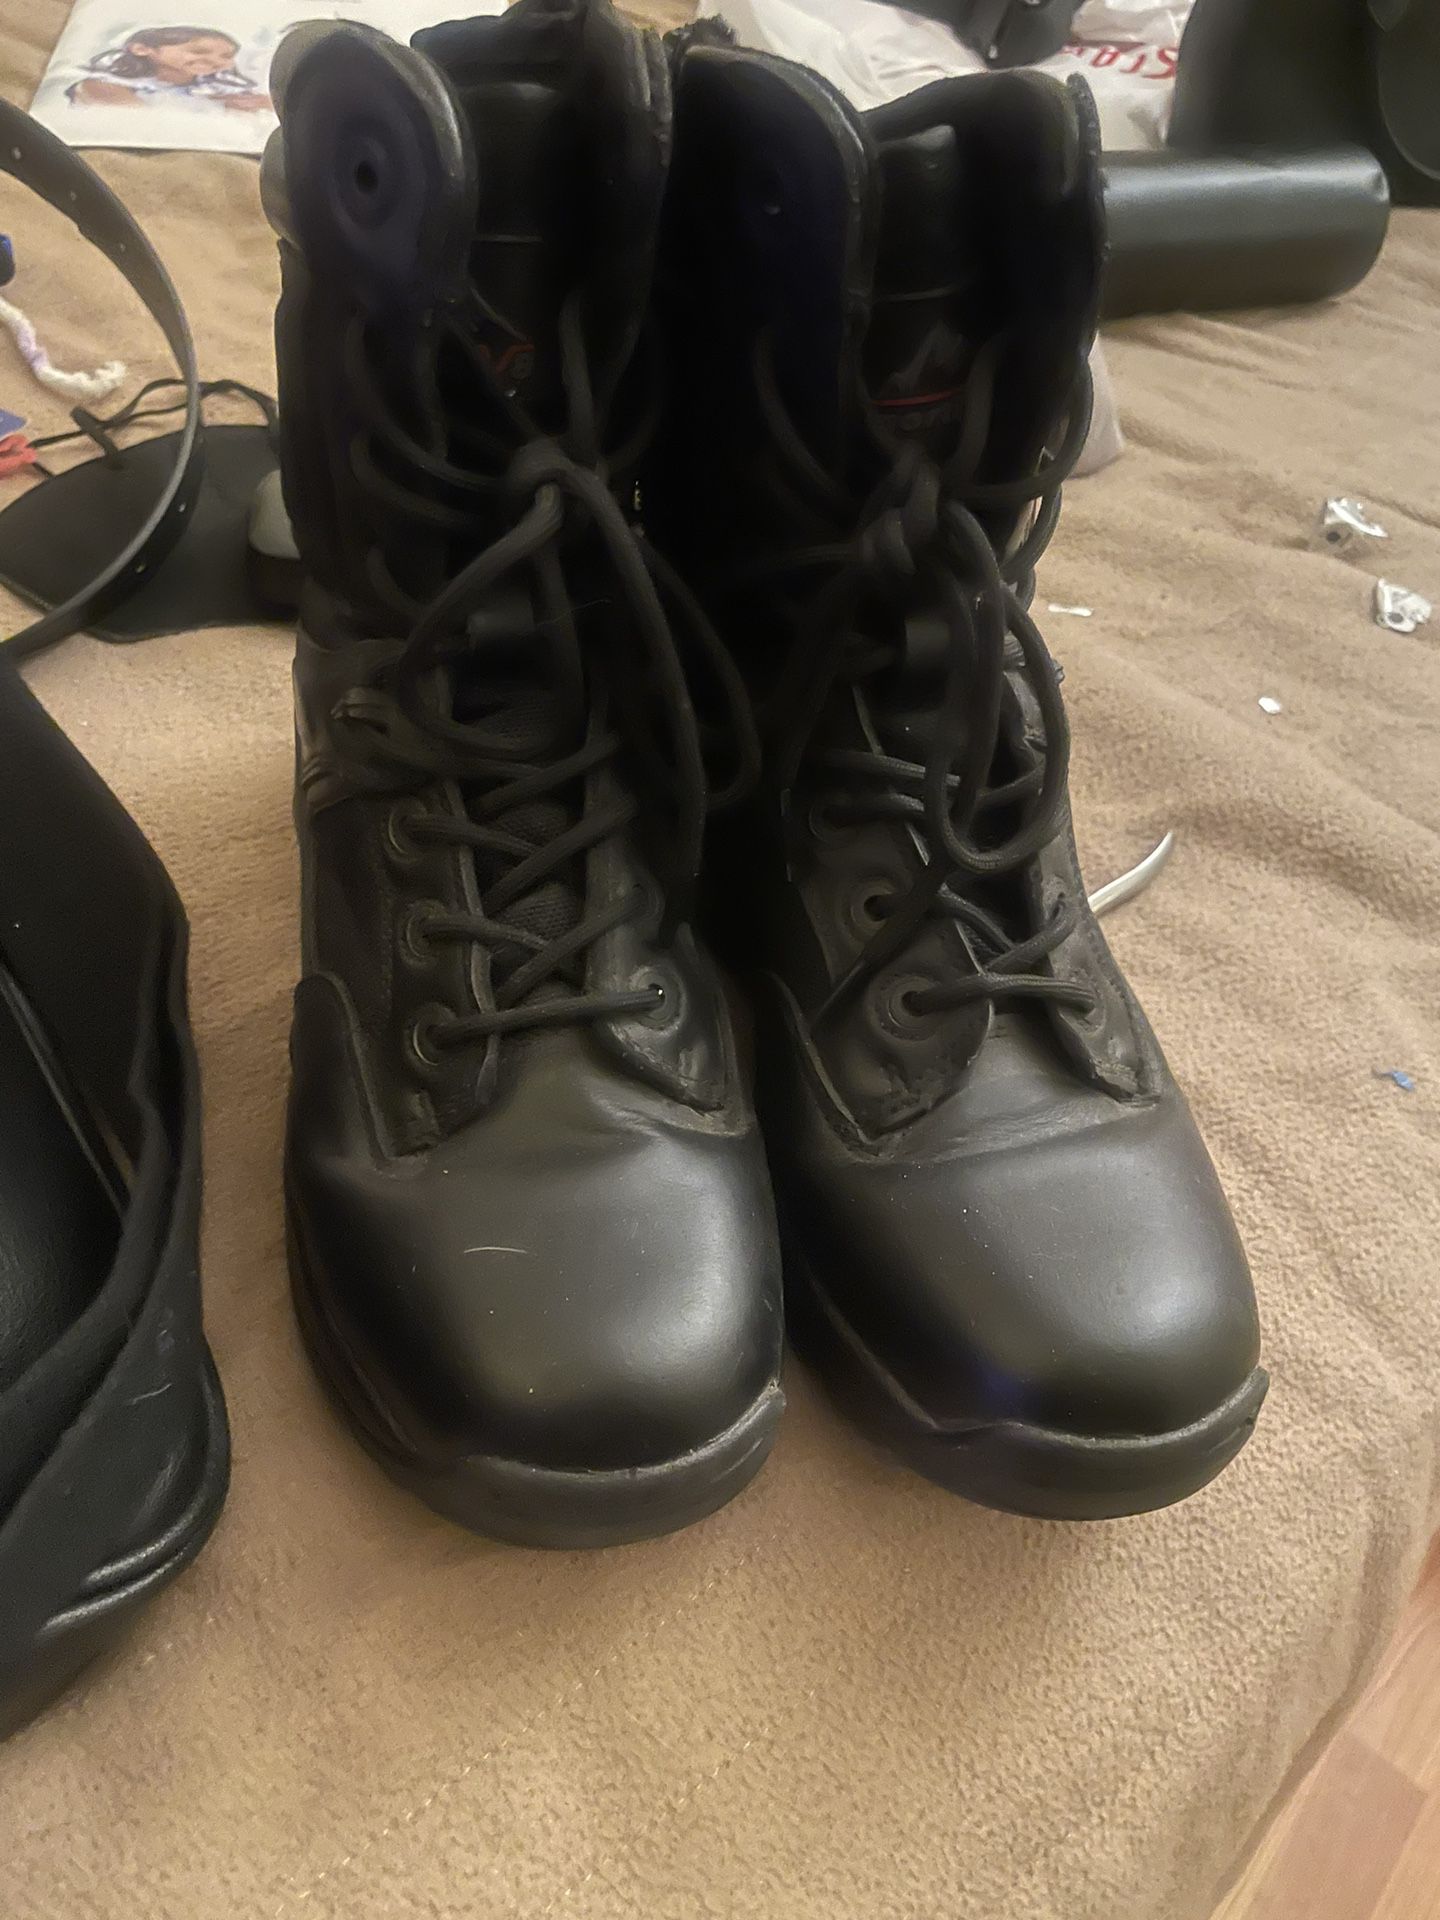 EMT/POLICE/MILITARY BOOTS $45 OBO